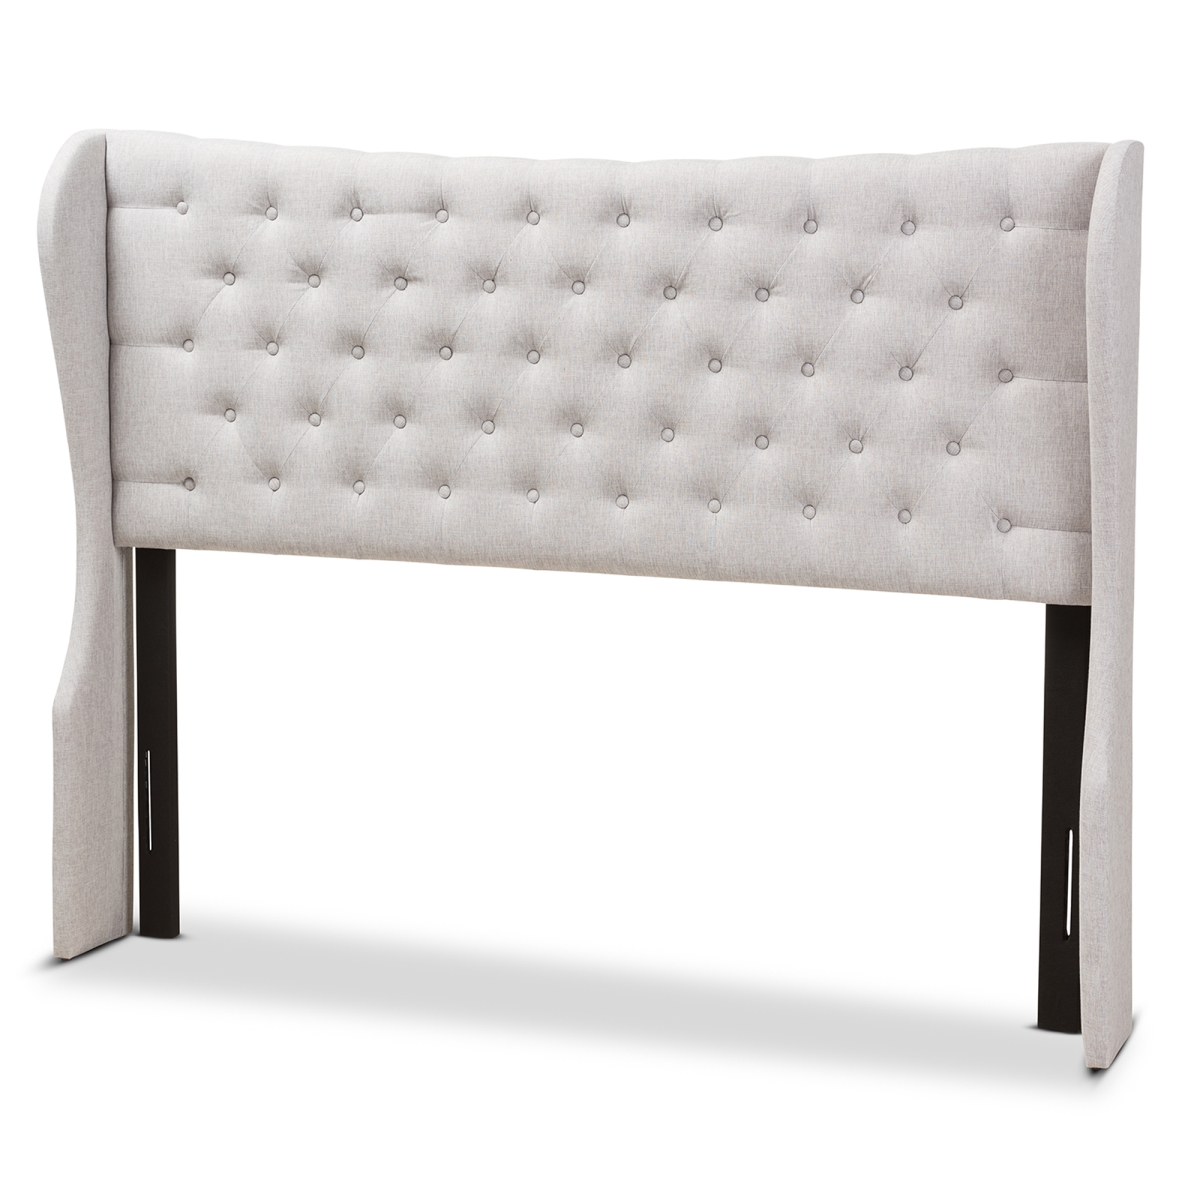 Picture of Baxton Studio BBT6631-Greyish Beige-King HB Cadence Modern & Contemporary Greyish Beige Fabric Button - Tufted King Size Winged Headboard